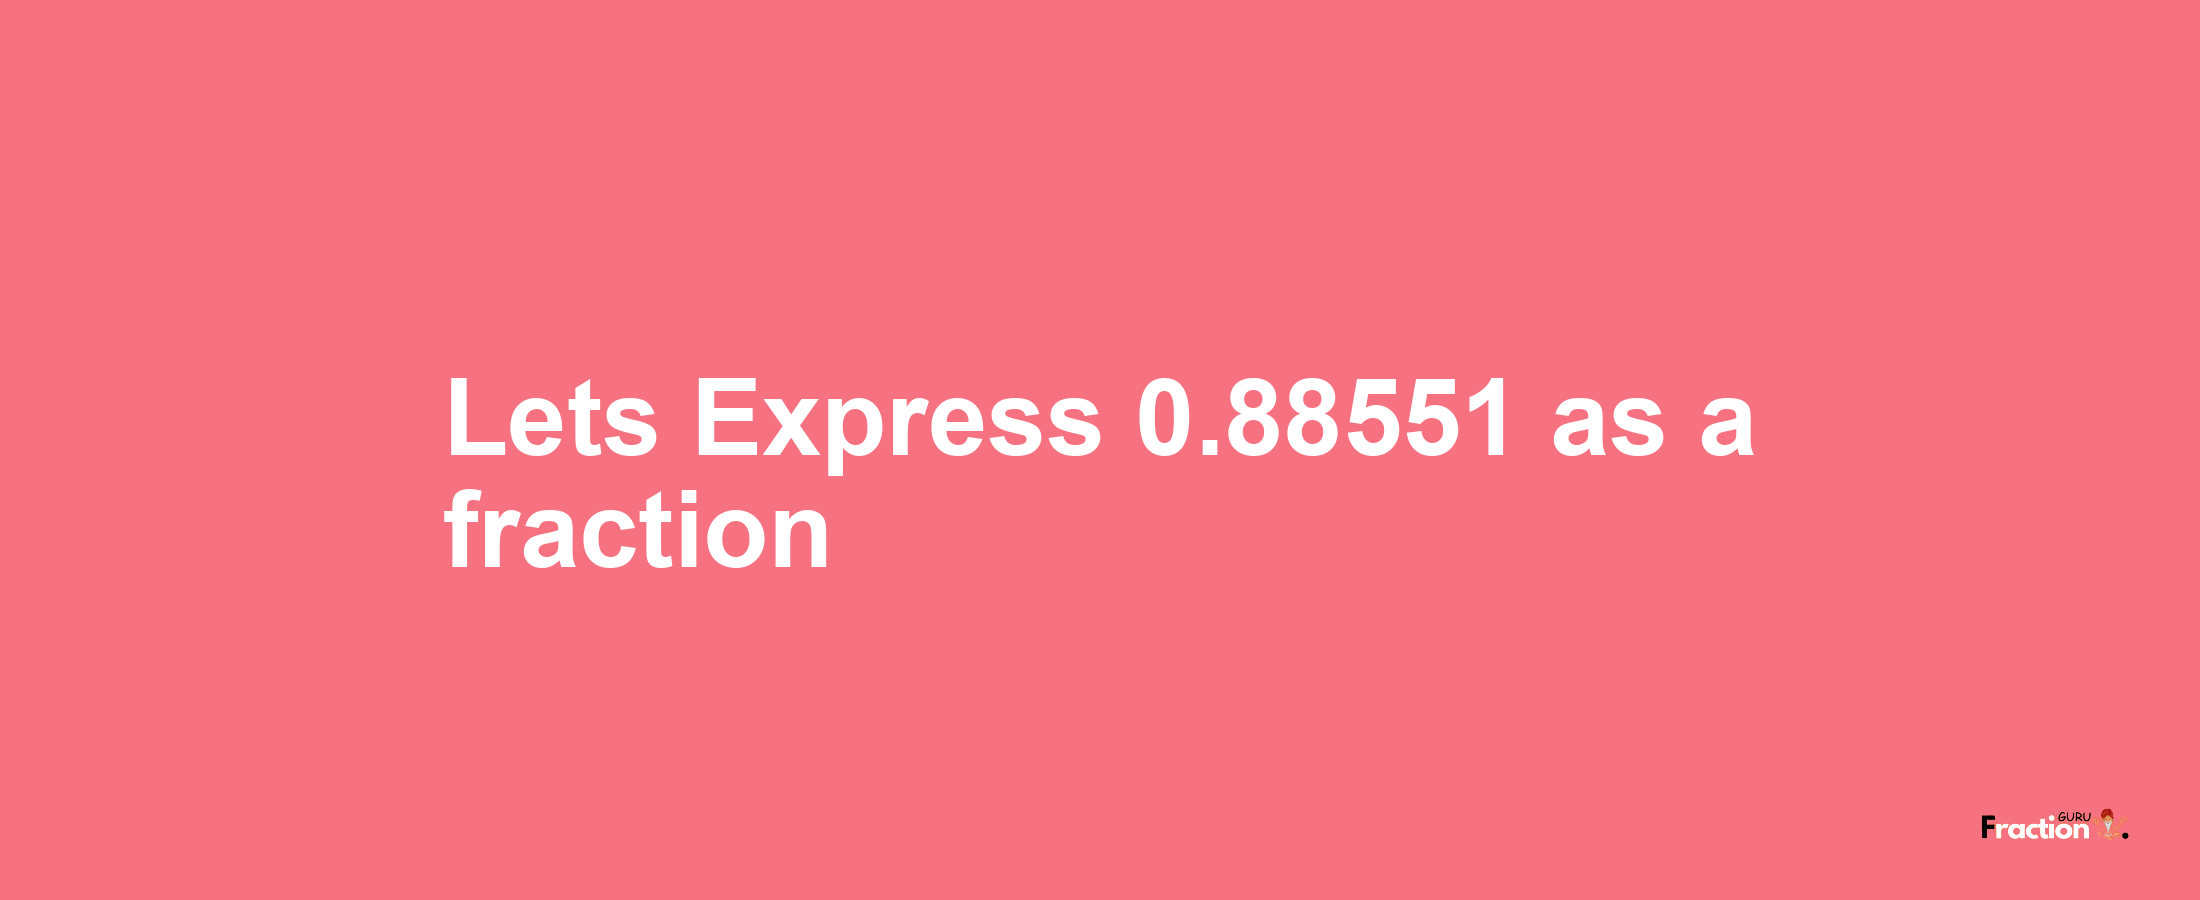 Lets Express 0.88551 as afraction